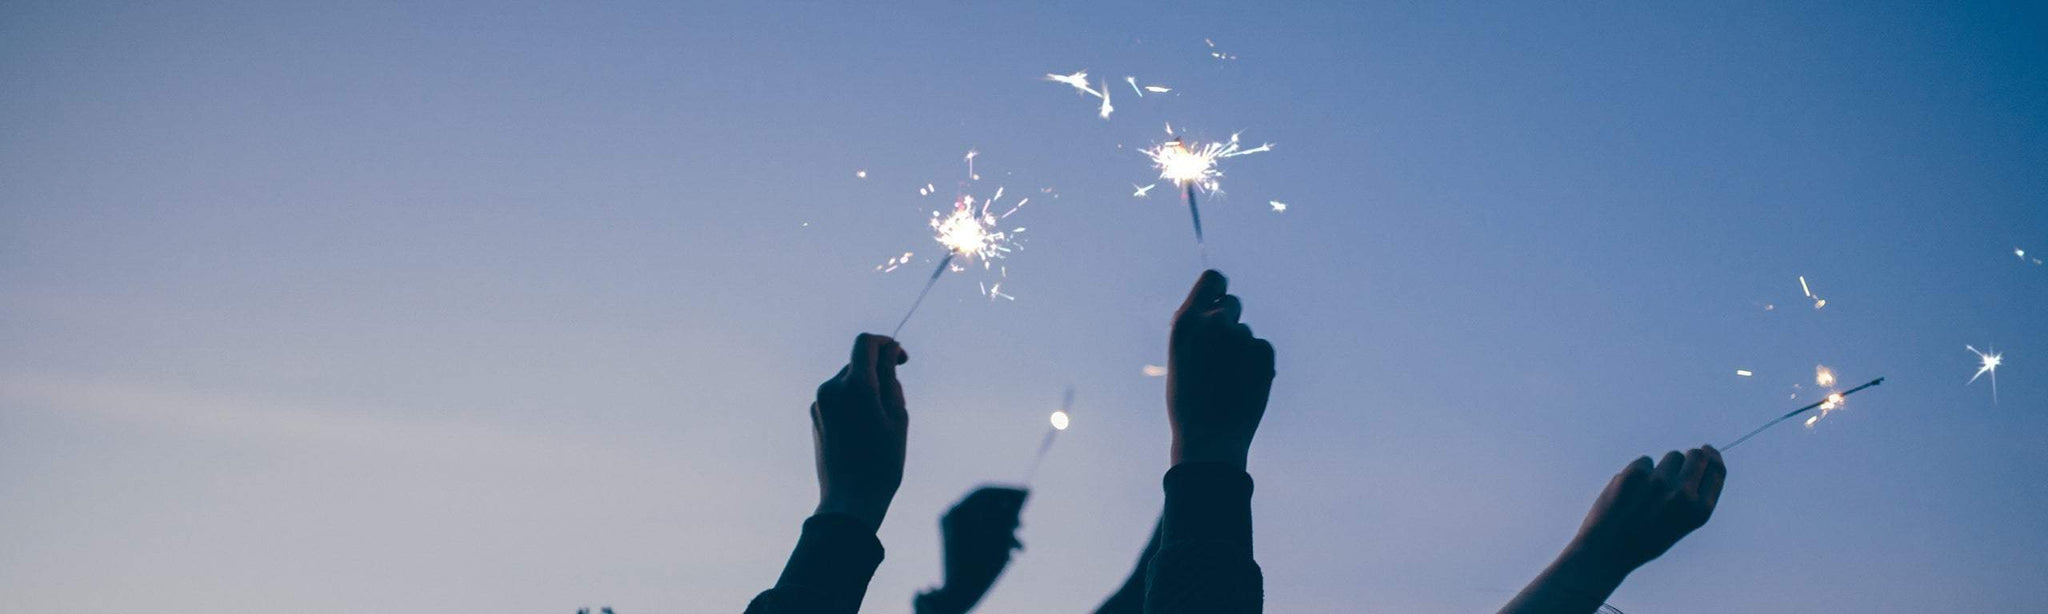 9 Healthy ways to embrace the New Year well